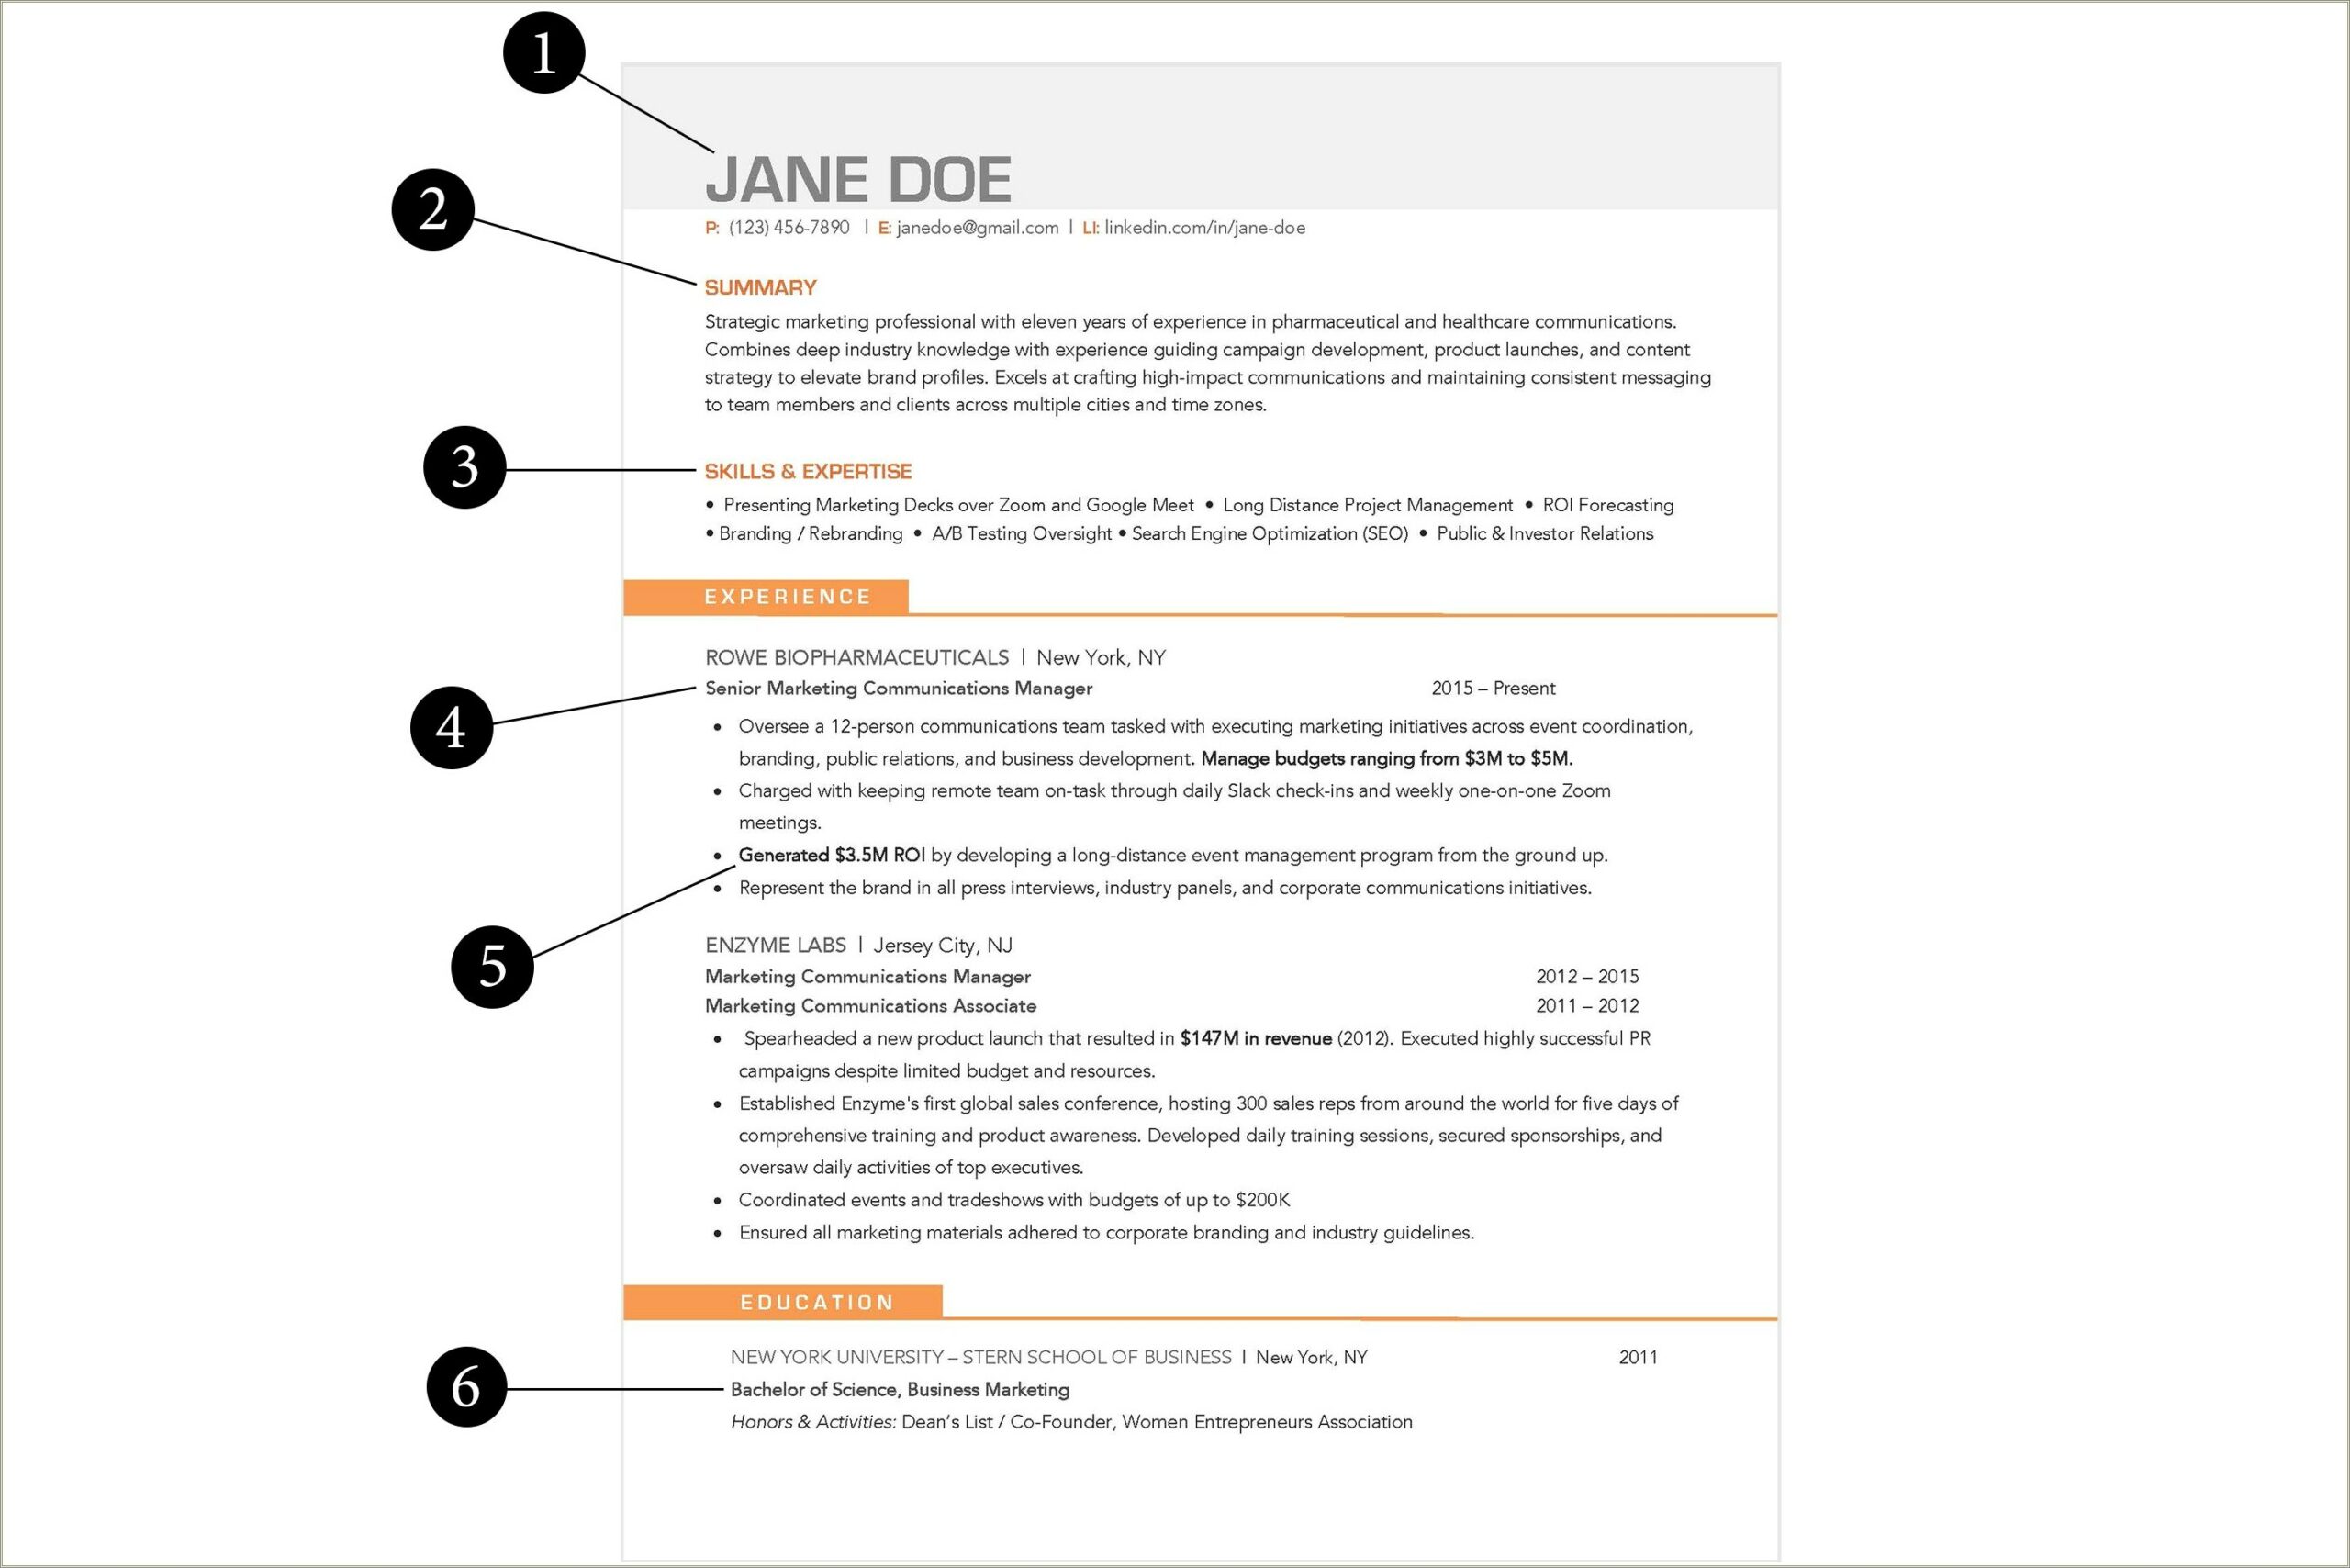 Call Center Resume Samples With No Experience